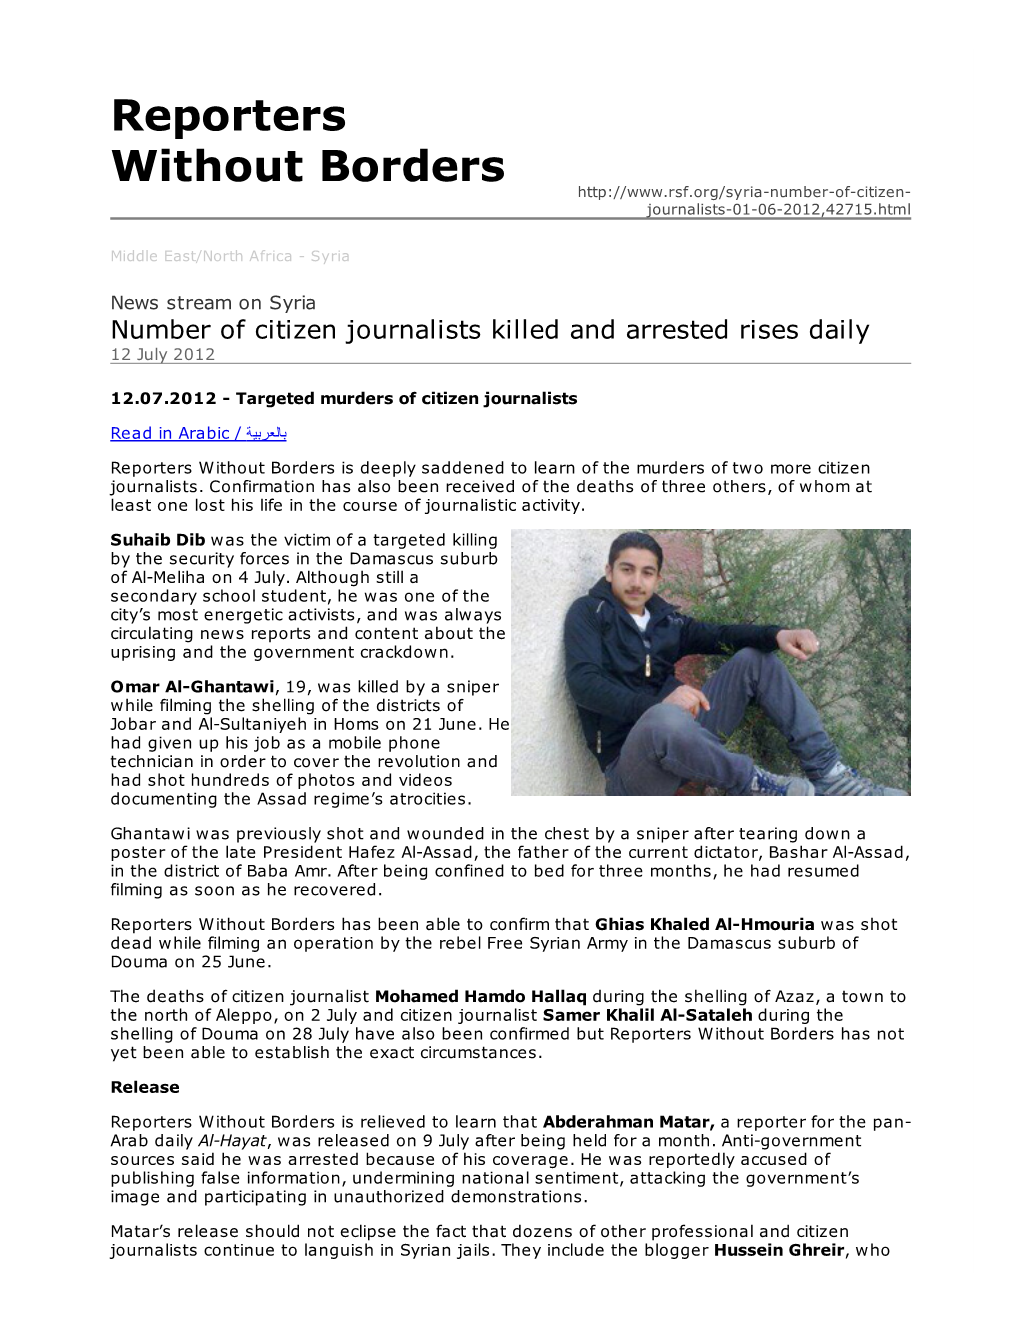 Reporters Without Borders Journalists-01-06-2012,42715.Html